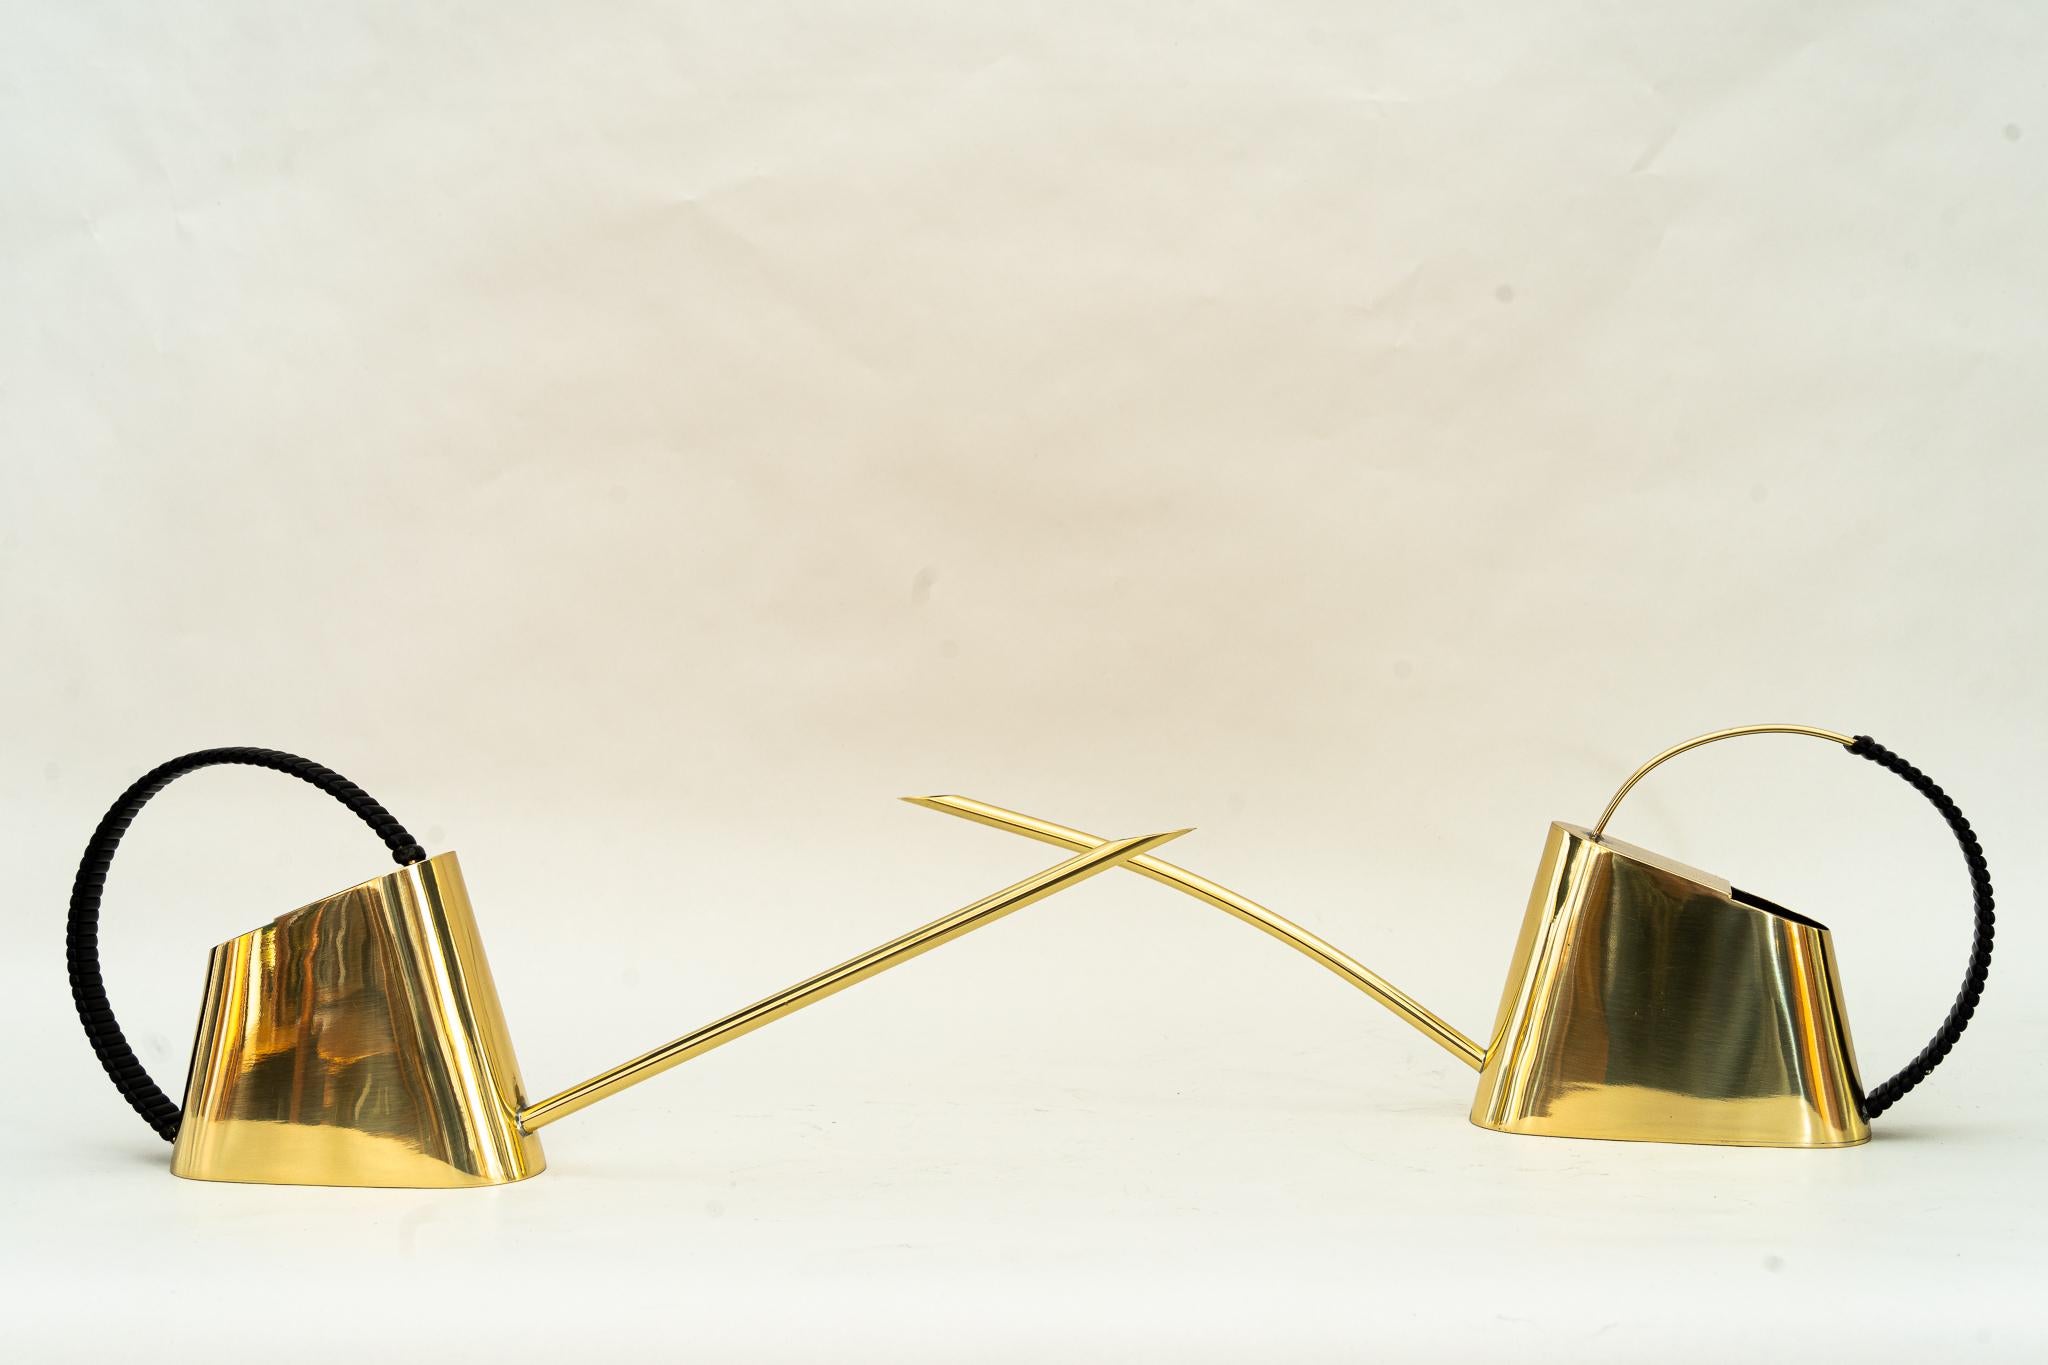 2x Brass Watering Cans, circa 1950s For Sale 8